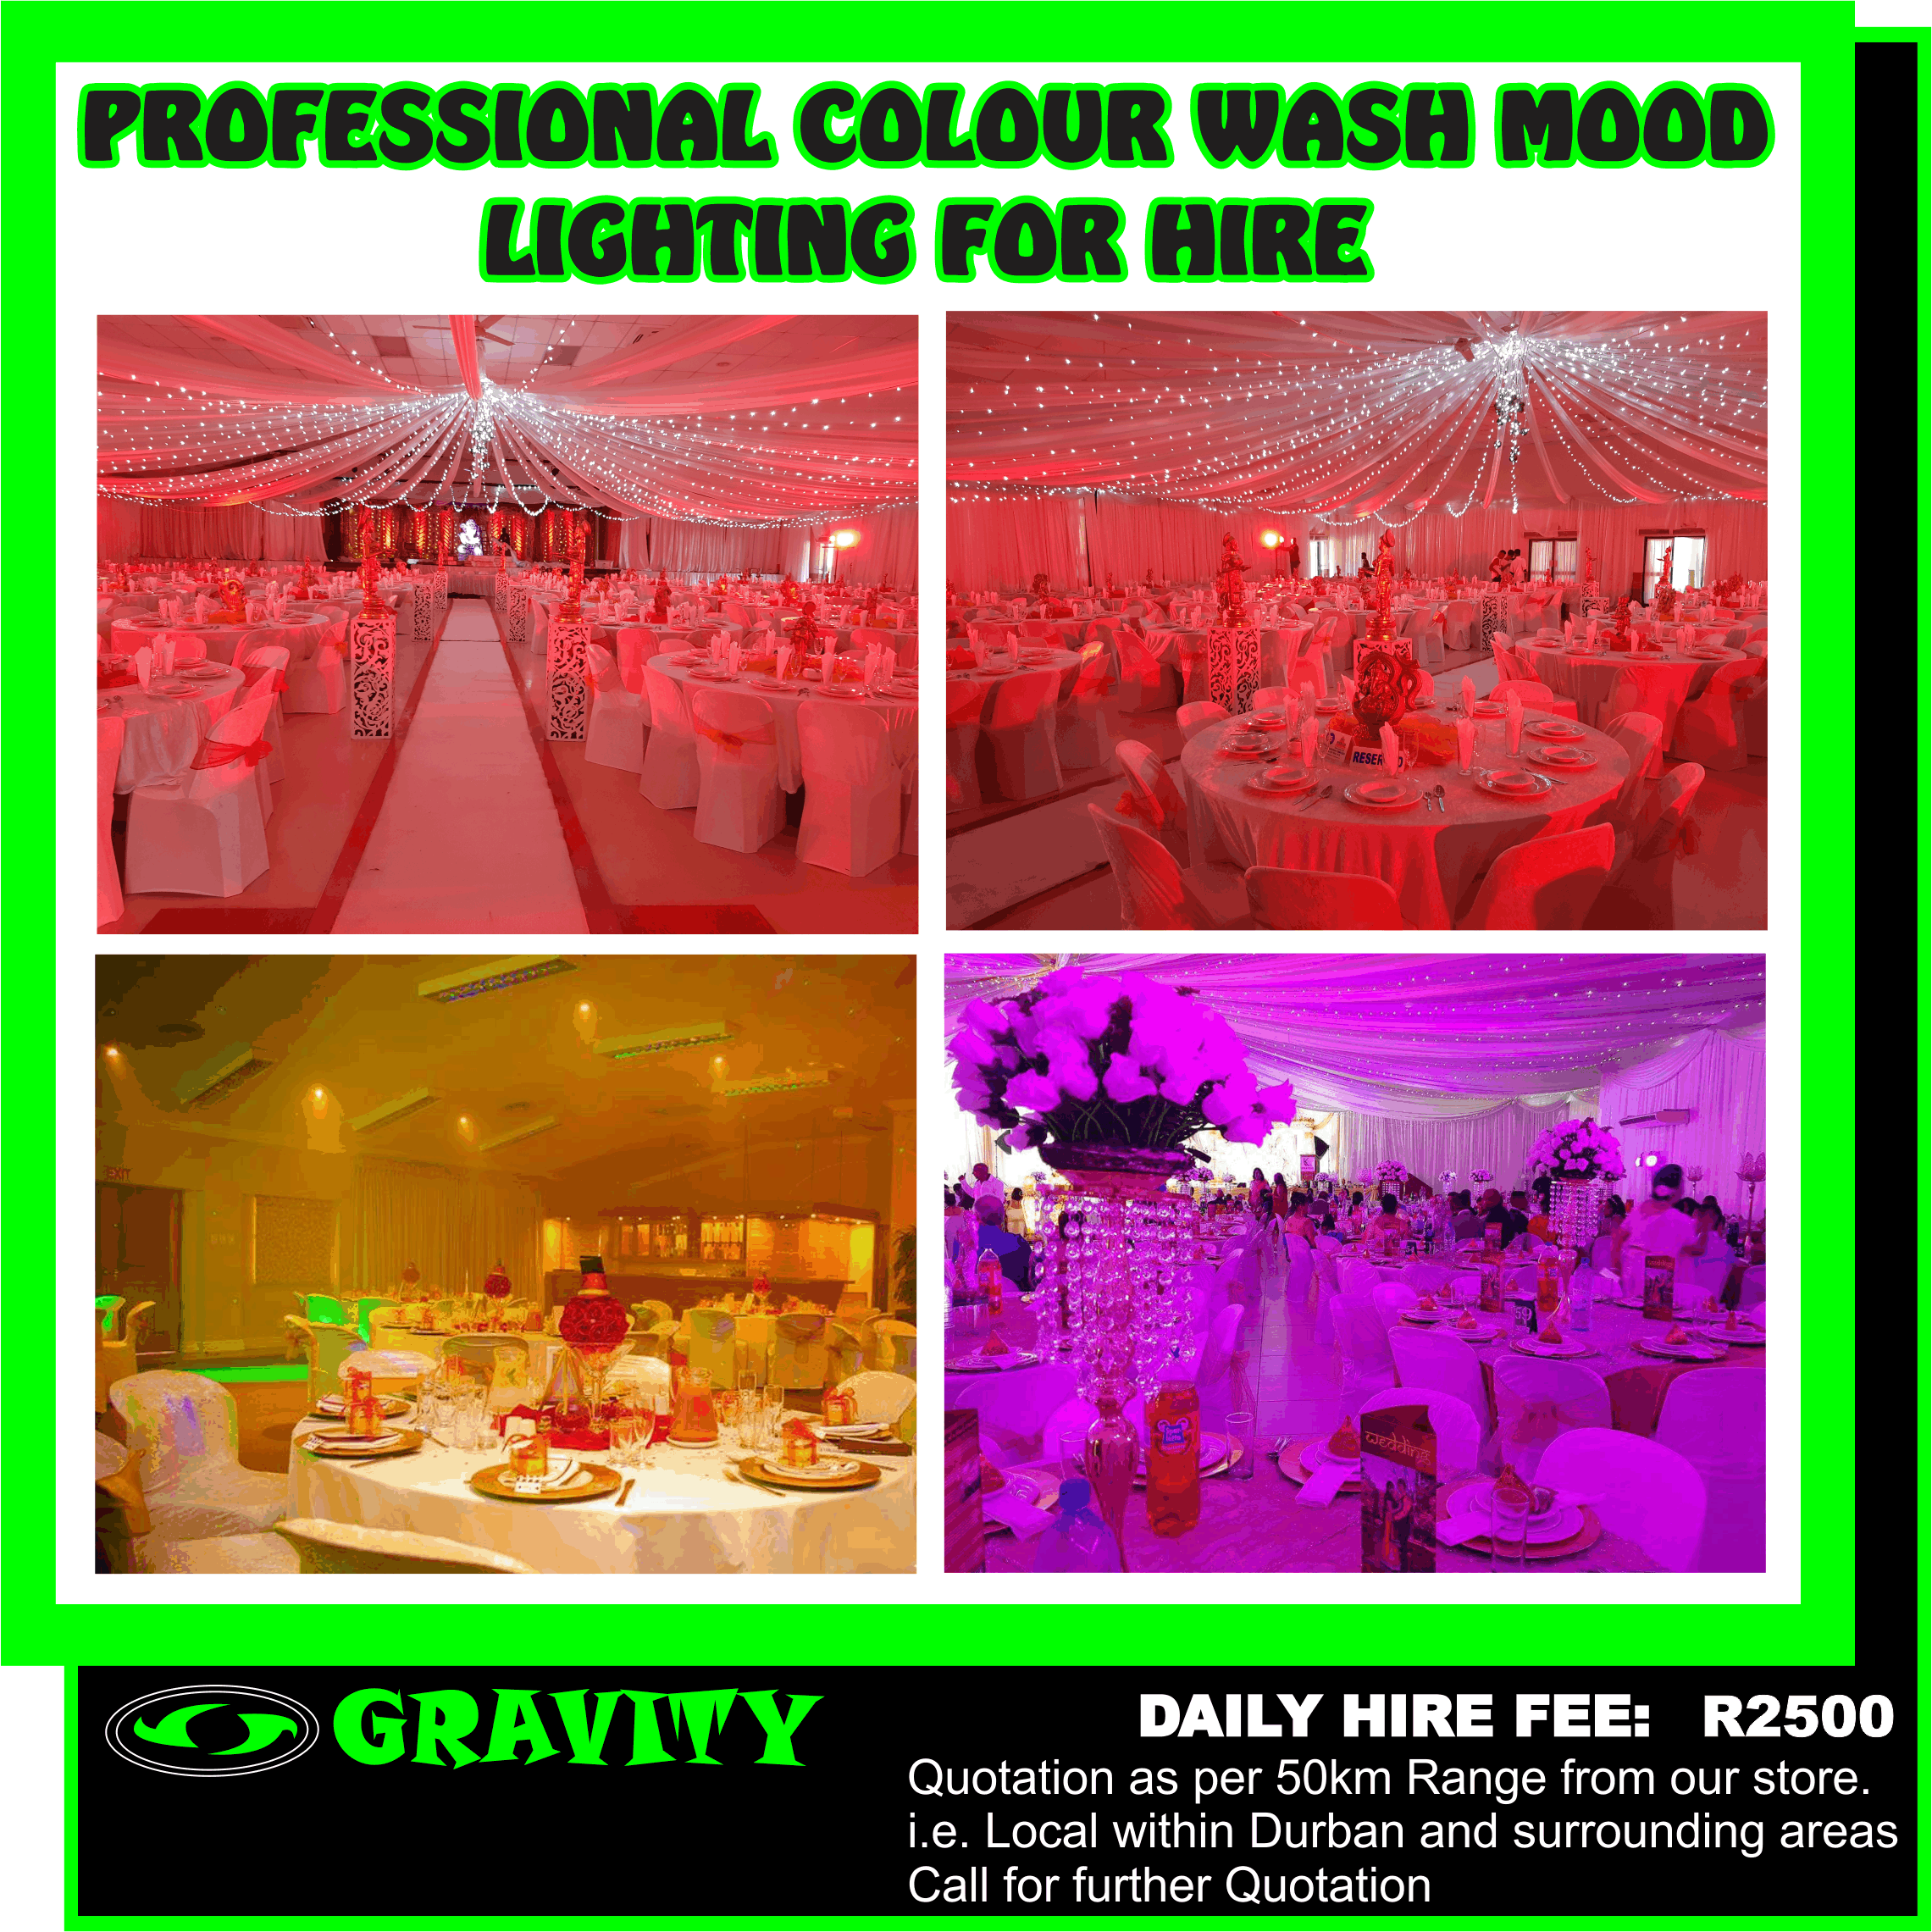 Colour wash lights in Durban City | Gumtree Classifieds in ... https://www.gumtree.co.za › s-durban-city › colour+wash+lights Results 1 - 20 of 24 - View Gumtree Free Online Classified Ads for colour wash lights and ... We also hire the following: Full hall draping Tiffany chairs Colour wash ... Colour wash lighting in KwaZulu-Natal | Gumtree Classifieds ... https://www.gumtree.co.za › s-kwazulu+natal › colour+wash+lighting Results 1 - 20 of 44 - View Gumtree Free Online Classified Ads for colour wash lighting and ... We also hire the following: Full hall draping Tiffany chairs Colour wash ... Durban city, Pietermaritzburg, Richard's bay, Port Shepstone, Mooi river, ... DISCO LIGHTING FOR HIRE - GRAVITY DJ STORE GRAVITY ... https://www.gravityaudio.co.za › Custom › Home DISCO PARTY SMOKE MACHINE FOR HIRE IN DURBAN. LOW LYING FOG ..... DIY COLOUR WASH MOOD LIGHTING FOR HIRE-DURBAN. COLOUR WASH ... You've visited this page many times. Last visit: 2019/11/11 Par Can Colour Wash Hire – Event Furniture Hire https://www.eventfurniturehire.co.za › pan-can-colour-wash-hire LED Par Can Colour Wash Lights for Hire Durban. LED Par Can Colour Wash Lights for Hire from Event Furniture Hire in and around the Durban area. This light is most often used as colourful up-lighter to add to the decor of your venue. Or it is very popular as colour wash lights for backdrops.  COLOUR WASH HIRE DURBAN Event sound and lighting in South Coast, Durban and ... www.audiotrix.co.za › Our-Services We provide the following services and hiring: SOUND ... gallery/downsize_1280_0-light-shadow-colors-people-rave. LIGHTING & ... Colour wash lighting ... disco lights hire in Durban | Snupit https://www.snupit.co.za › durban › disco-lights-hire Rated and reviewed by the community of Durban, see photos, licenses and ... We supply dance floors, stage, lighting, mobile bars, PA Hire, colour wash l ...show ... Magic Lighting – Lighting and Decor Hire https://magiclighting.co.za Lighting Sales Air Conditioning Marquee hire Custom Staging Power Services Table Layout Flooring Services Sound & Entertainment Tables & Chairs. Lighting ... Colour Wash Lighting Hire | Facebook https://www.facebook.com › media › set By GRAVITY SOUND & LIGHTING WAREHOUSE DURBAN · Updated about a ... function venue with the correct Colour Wash Lighting now available for hire At Disco Gravity-Mobile Disco For Hire - Durban, KwaZulu-Natal ... https://www.facebook.com › ... › Audio Visual Equipment Store  Rating: 5 - ‎Review by Navishka Lutchman Colour wash Lighting effects. Sound & DJ & Intelligent Lighting. Disco GRAVITY DJ Rajen 0837252146 #colourwashlighting #intelligentLighting #uplighting ... Searches related to COLOUR WASH HIRE DURBAN speaker hire durban  sound for hire  imix durban  sound and lighting durban  lighting hire  disco lights for hire  sound equipment for hire  sound system hiring DISCO LIGHTING FOR HIRE - GRAVITY DJ STORE GRAVITY ... https://www.gravityaudio.co.za › Custom › Home COMBO DJ DISCO LIGHTING FOR HIRE AT GRAVITY SOUND AND LIGHTING WAREHOUSE DURBAN 0315072736 OR 0315072463. FOR THE ULTIMATE DISCO LIGHTS FOR HIRE FOR THAT SPECIAL EVENT OR PARTY THAT YOU GOING TO HAVE ...COME IN TO OUR STORE TO HIRE A LIGHTING PACKAGE FOR YOUR NEXT OCCASION OR FOR YOUR NEXT PARTY. You've visited this page many times. Last visit: 2019/11/11 Lighting: Stage, Wedding and Event Lighting Hire in Durban https://www.snapthat.co.za › lighting Lighting: Stage, Wedding and Event Lighting Hire in Durban. ... LED par cans are the bedrock of a good lighting rig while a follow spot keeps the audience ... ‎Whites/Pastels · ‎Blues · ‎Greens · ‎Browns Lighting https://www.socialight.co.za Best Lighting and Sound Hire in Gauteng and Durban. Full solution packages for different sized events. Magic Lighting – Lighting and Decor Hire https://magiclighting.co.za Lighting Sales Air Conditioning Marquee hire Custom Staging Power Services Table Layout Flooring Services Sound & Entertainment Tables & Chairs. Lighting ... L.E.D. Lighting and lighting hire for events and weddings https://soundfx.co.za › l-e-d-lighting May 10, 2019 - L.E.D. Lighting hire for party, events and weddings in Cape Town and Joburg. Fairy lights, outdoor lights, tent lights, mood lights, ambient ... Colour wash lights in Durban City | Gumtree Classifieds in ... https://www.gumtree.co.za › s-durban-city › colour+wash+lights Results 1 - 20 of 24 - View Gumtree Free Online Classified Ads for colour wash lights and more ... Confetti Cannons, Colour washing, Screens and projectors for hire ... Used LED FLOOD LIGHT COLOUR WASH LIGHTING FOR SALE SOLD IN ... Led lights for hire in South Africa | Gumtree Classifieds in ... https://www.gumtree.co.za › s-led+lights+for+hire Results 1 - 20 of 217 - Sound & Lighting Hire Durban Tel 0724585522 amplifiers & mixers hire cordless microphones & pa audio visual hire led screens hire ... Mustard Seed Productions: Sound Stage Lighting Hire Durban ... https://mustardseedproductions.co.za Mustard Seed Productions is a full service sound, lighting, stage, back-line and audio visual hire company based in Durban, KZN. Sound ... Ambient lighting around a room or venue in order to enhance the decor and set the mood of a function. Light and Sound Hire Companies in South Africa - Lighting for ... https://pink-book.co.za › Entertainment & Sound We have got a list of the best event sound and lighting experts to choose from. ... hire is an important part of any wedding day since it helps set the mood for your ... Wedding Lighting Hire Durban - Wedding Decor Durban weddingdecordurban.co.za › wedding-lighting-hire-durban Wedding Lighting Hire Durban: As Wedding Lighting Hire specialist take your colour ... bridal outfits and personal taste into account when planning out the mood. Searches related to MOOD LIGHTING LIGHTING HIRE DURBAN lighting hire pretoria  disco lights for hire durban  uv lights for hire  sound hire durban  lighting equipment hire  disco lights durban  sound equipment for hire